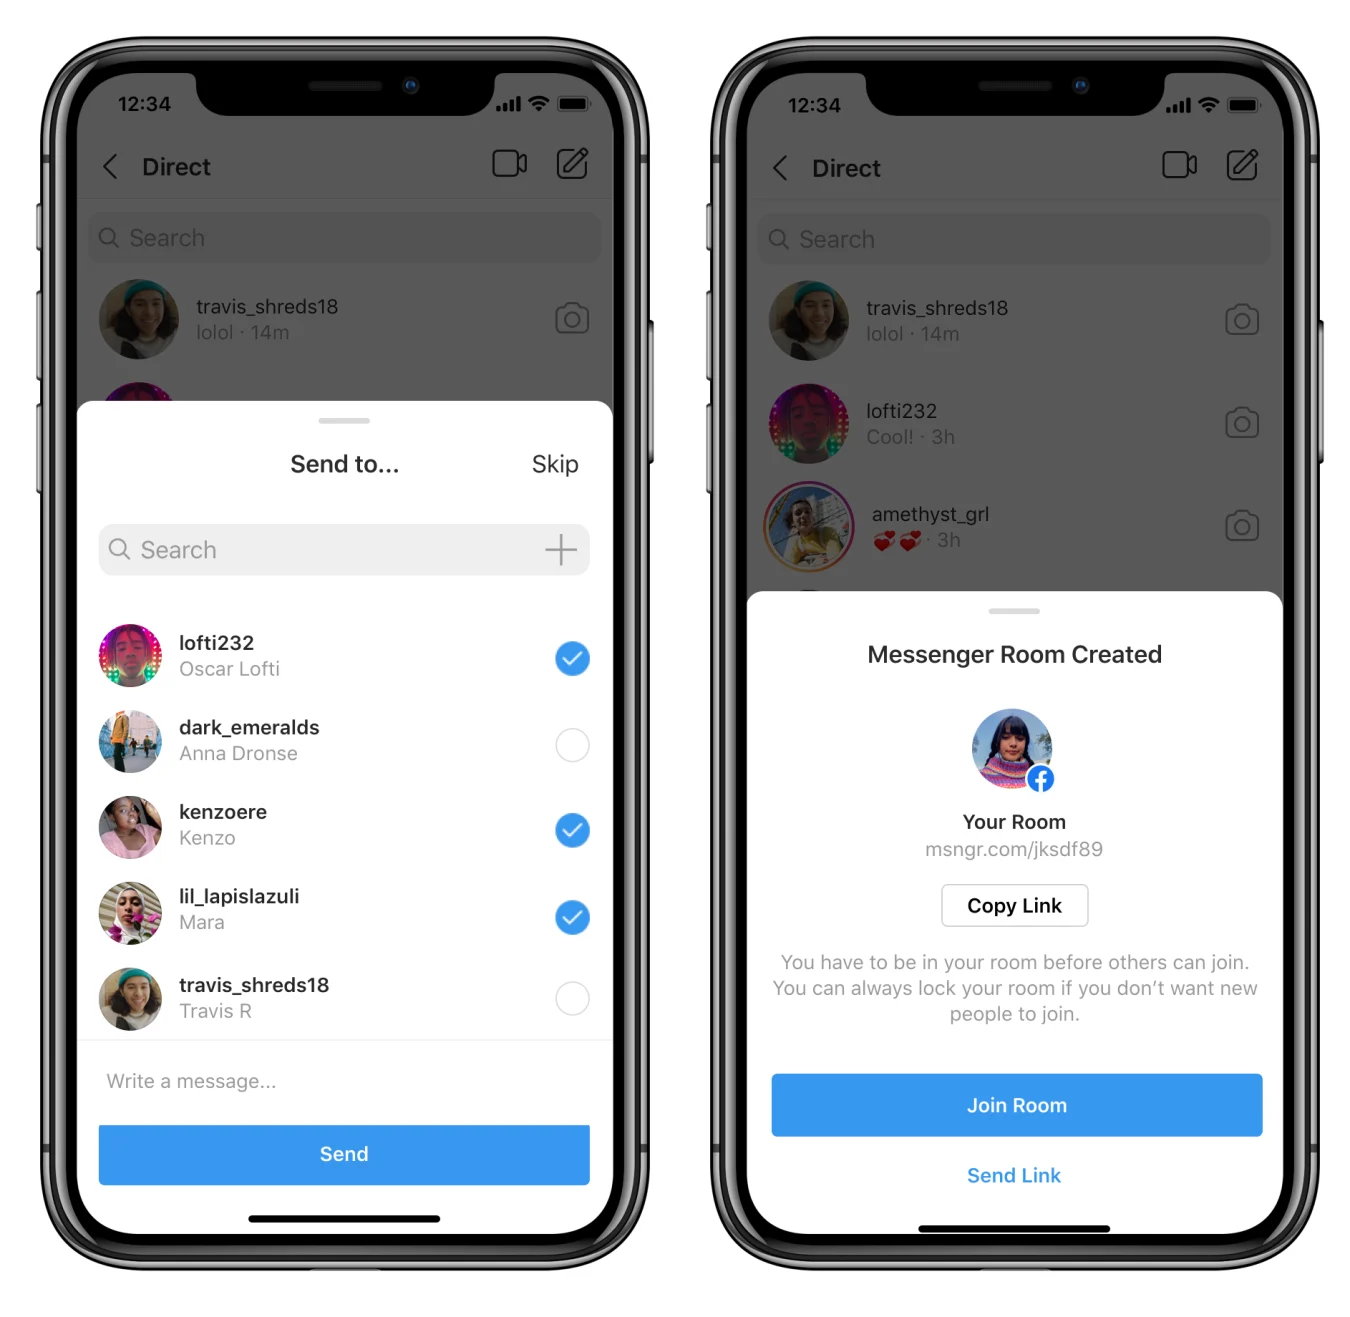 Joining a Messenger Room via Instagram directs to the Messenger app.